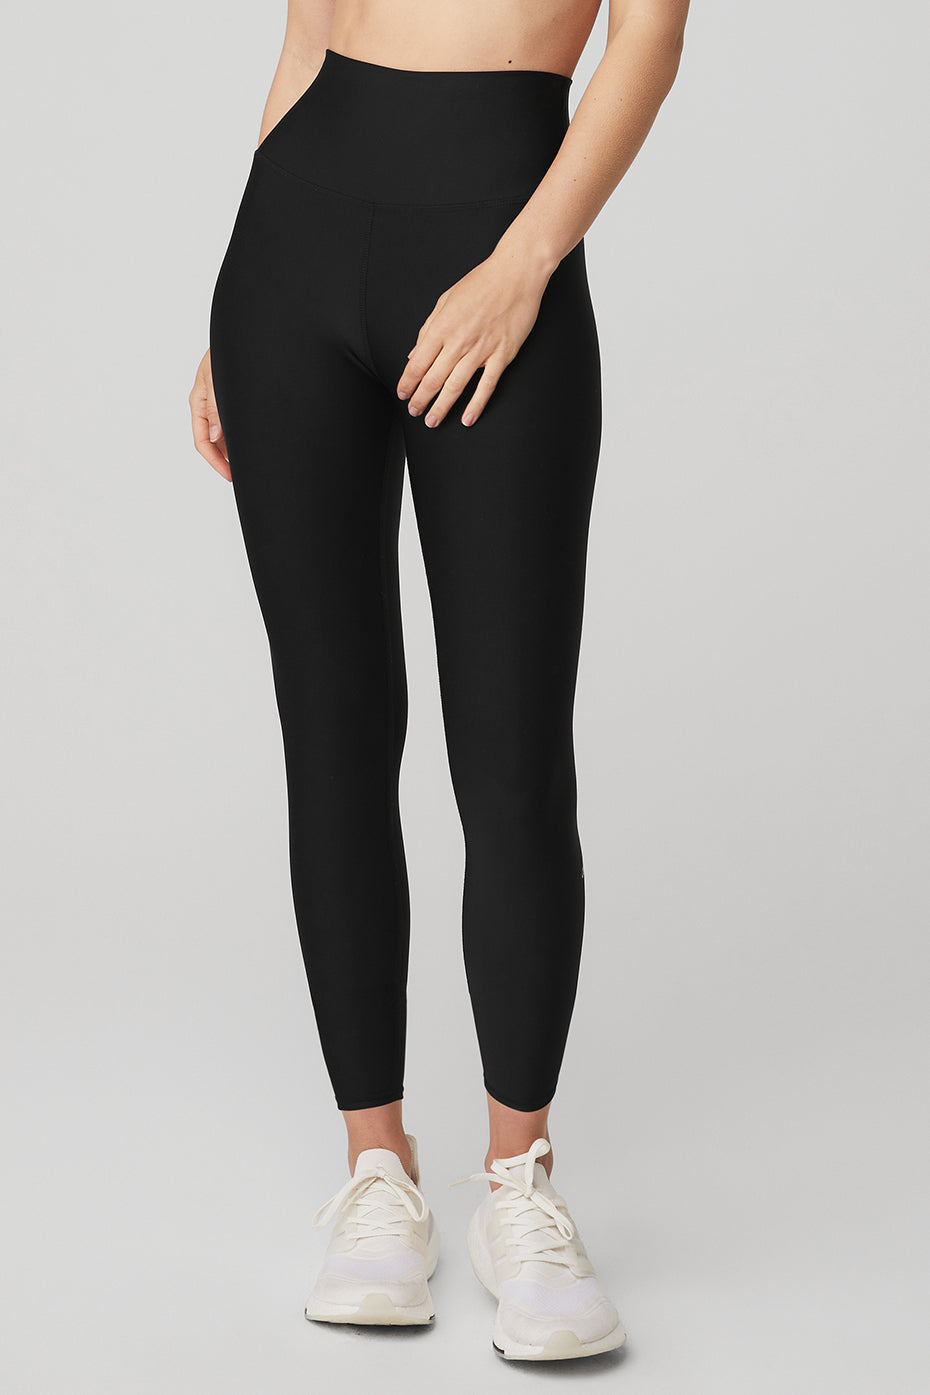 Nike Pro Dri-Fit Black 7/8 Athletic Leggings XS - $28 - From Lily